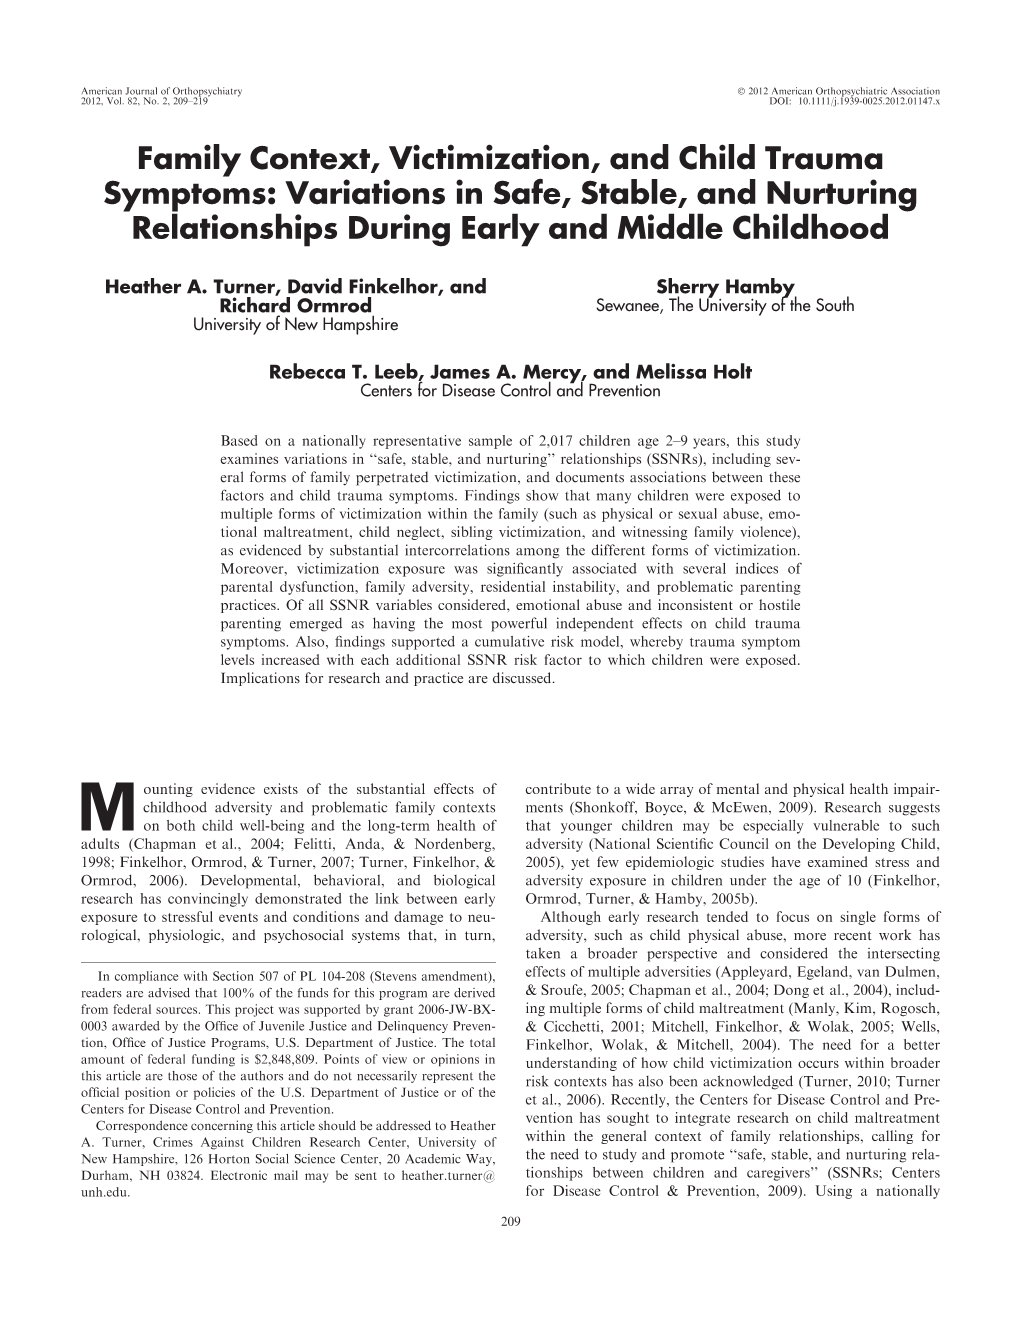 Family Context, Victimization, and Child Trauma Symptoms: Variations in Safe, Stable, and Nurturing Relationships During Early and Middle Childhood